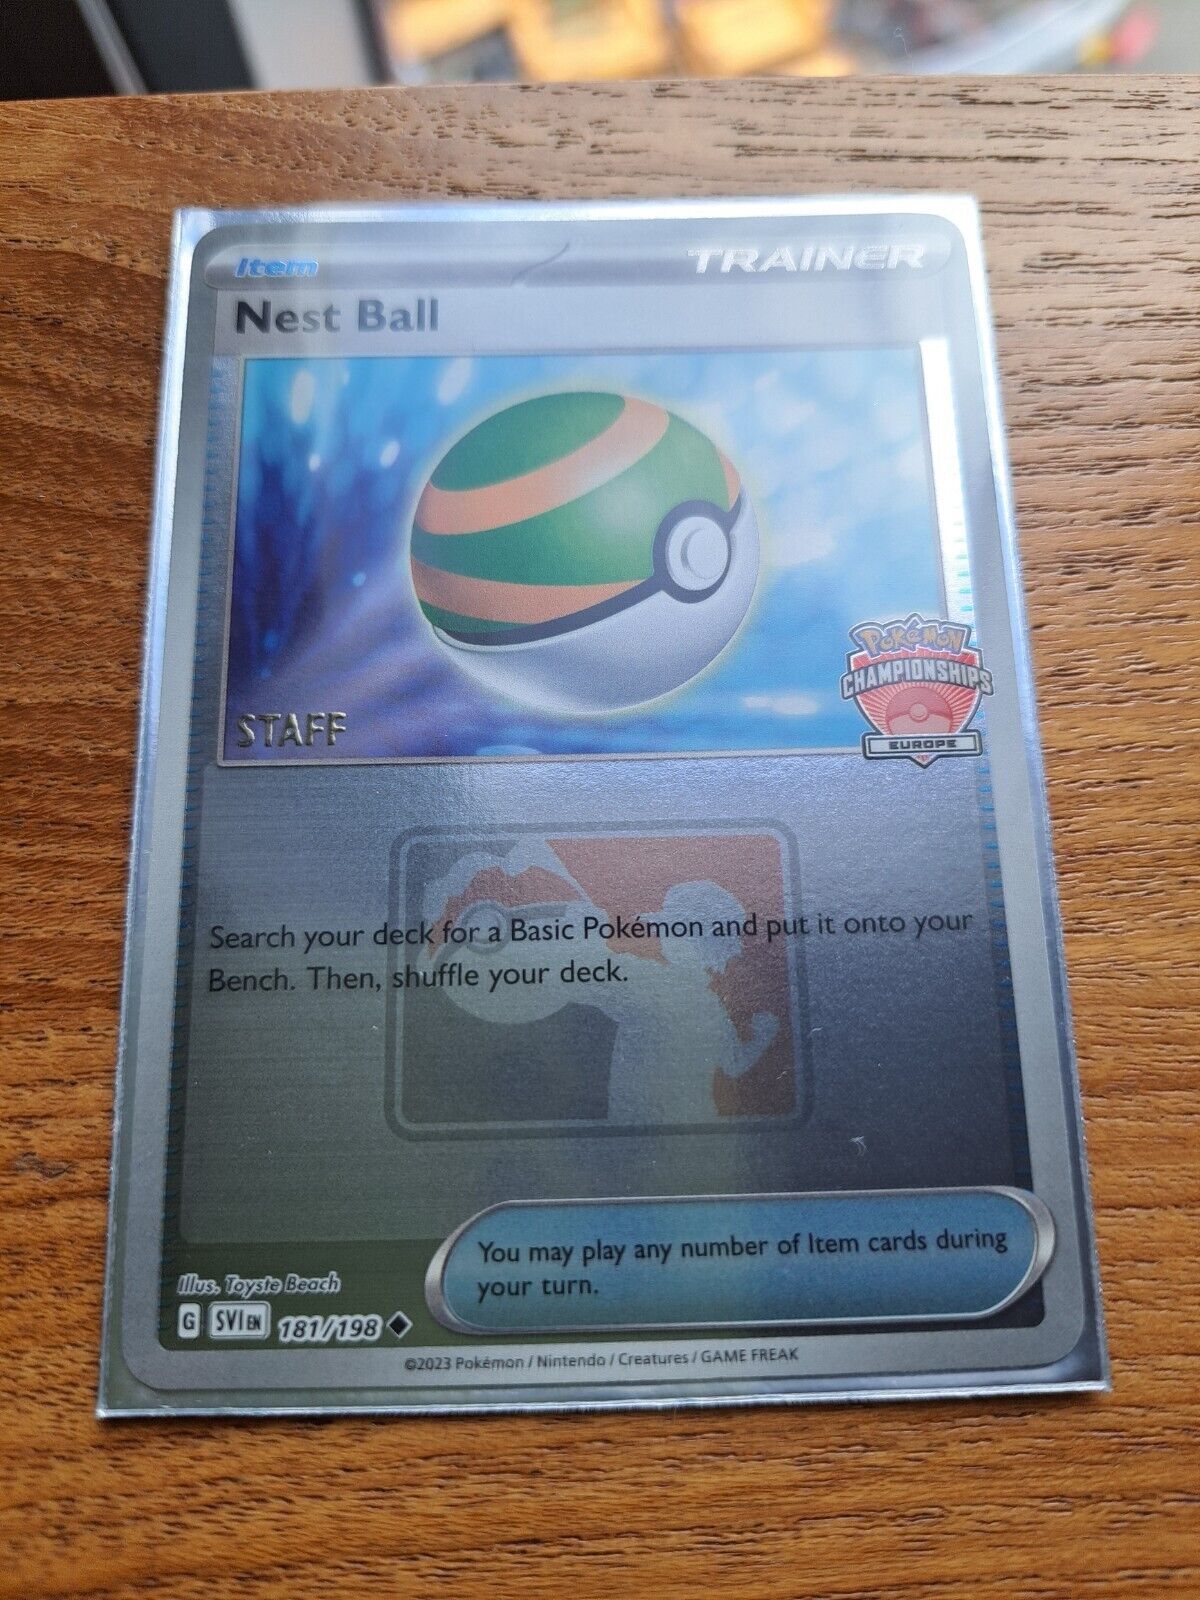 EUIC Competitor Package Revealed, Exclusive Nest Ball Promos; All